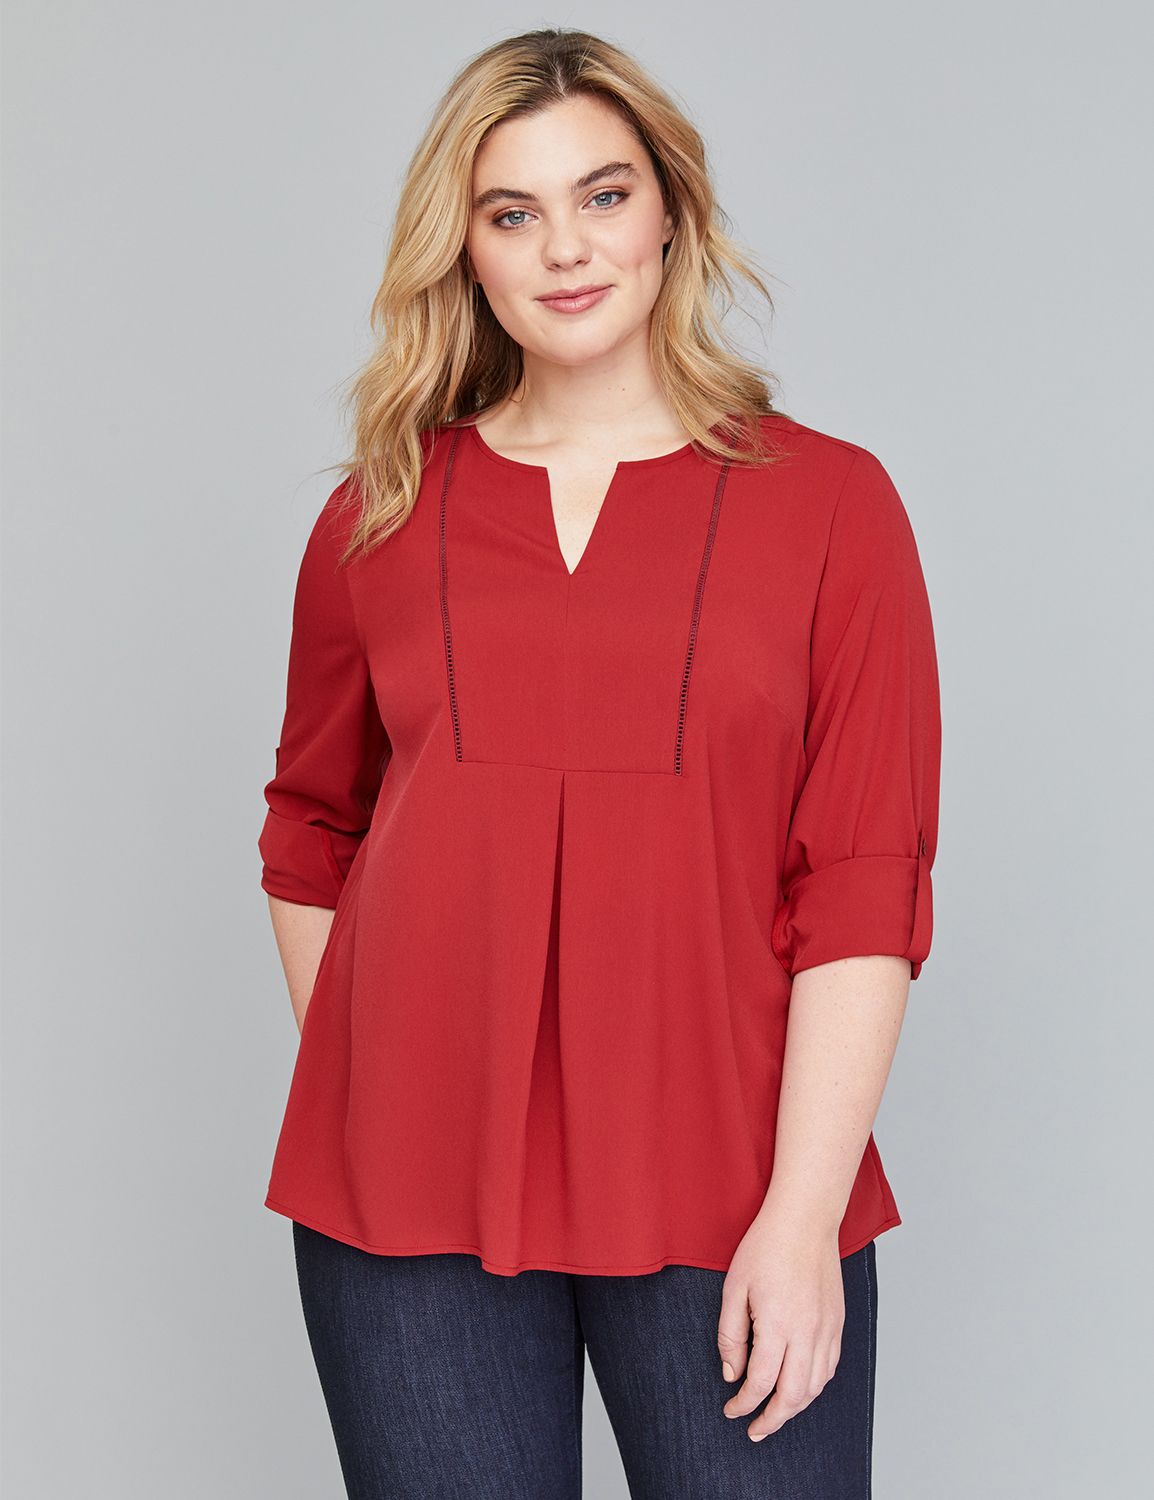 ladies tops and blouses lane bryant clothing